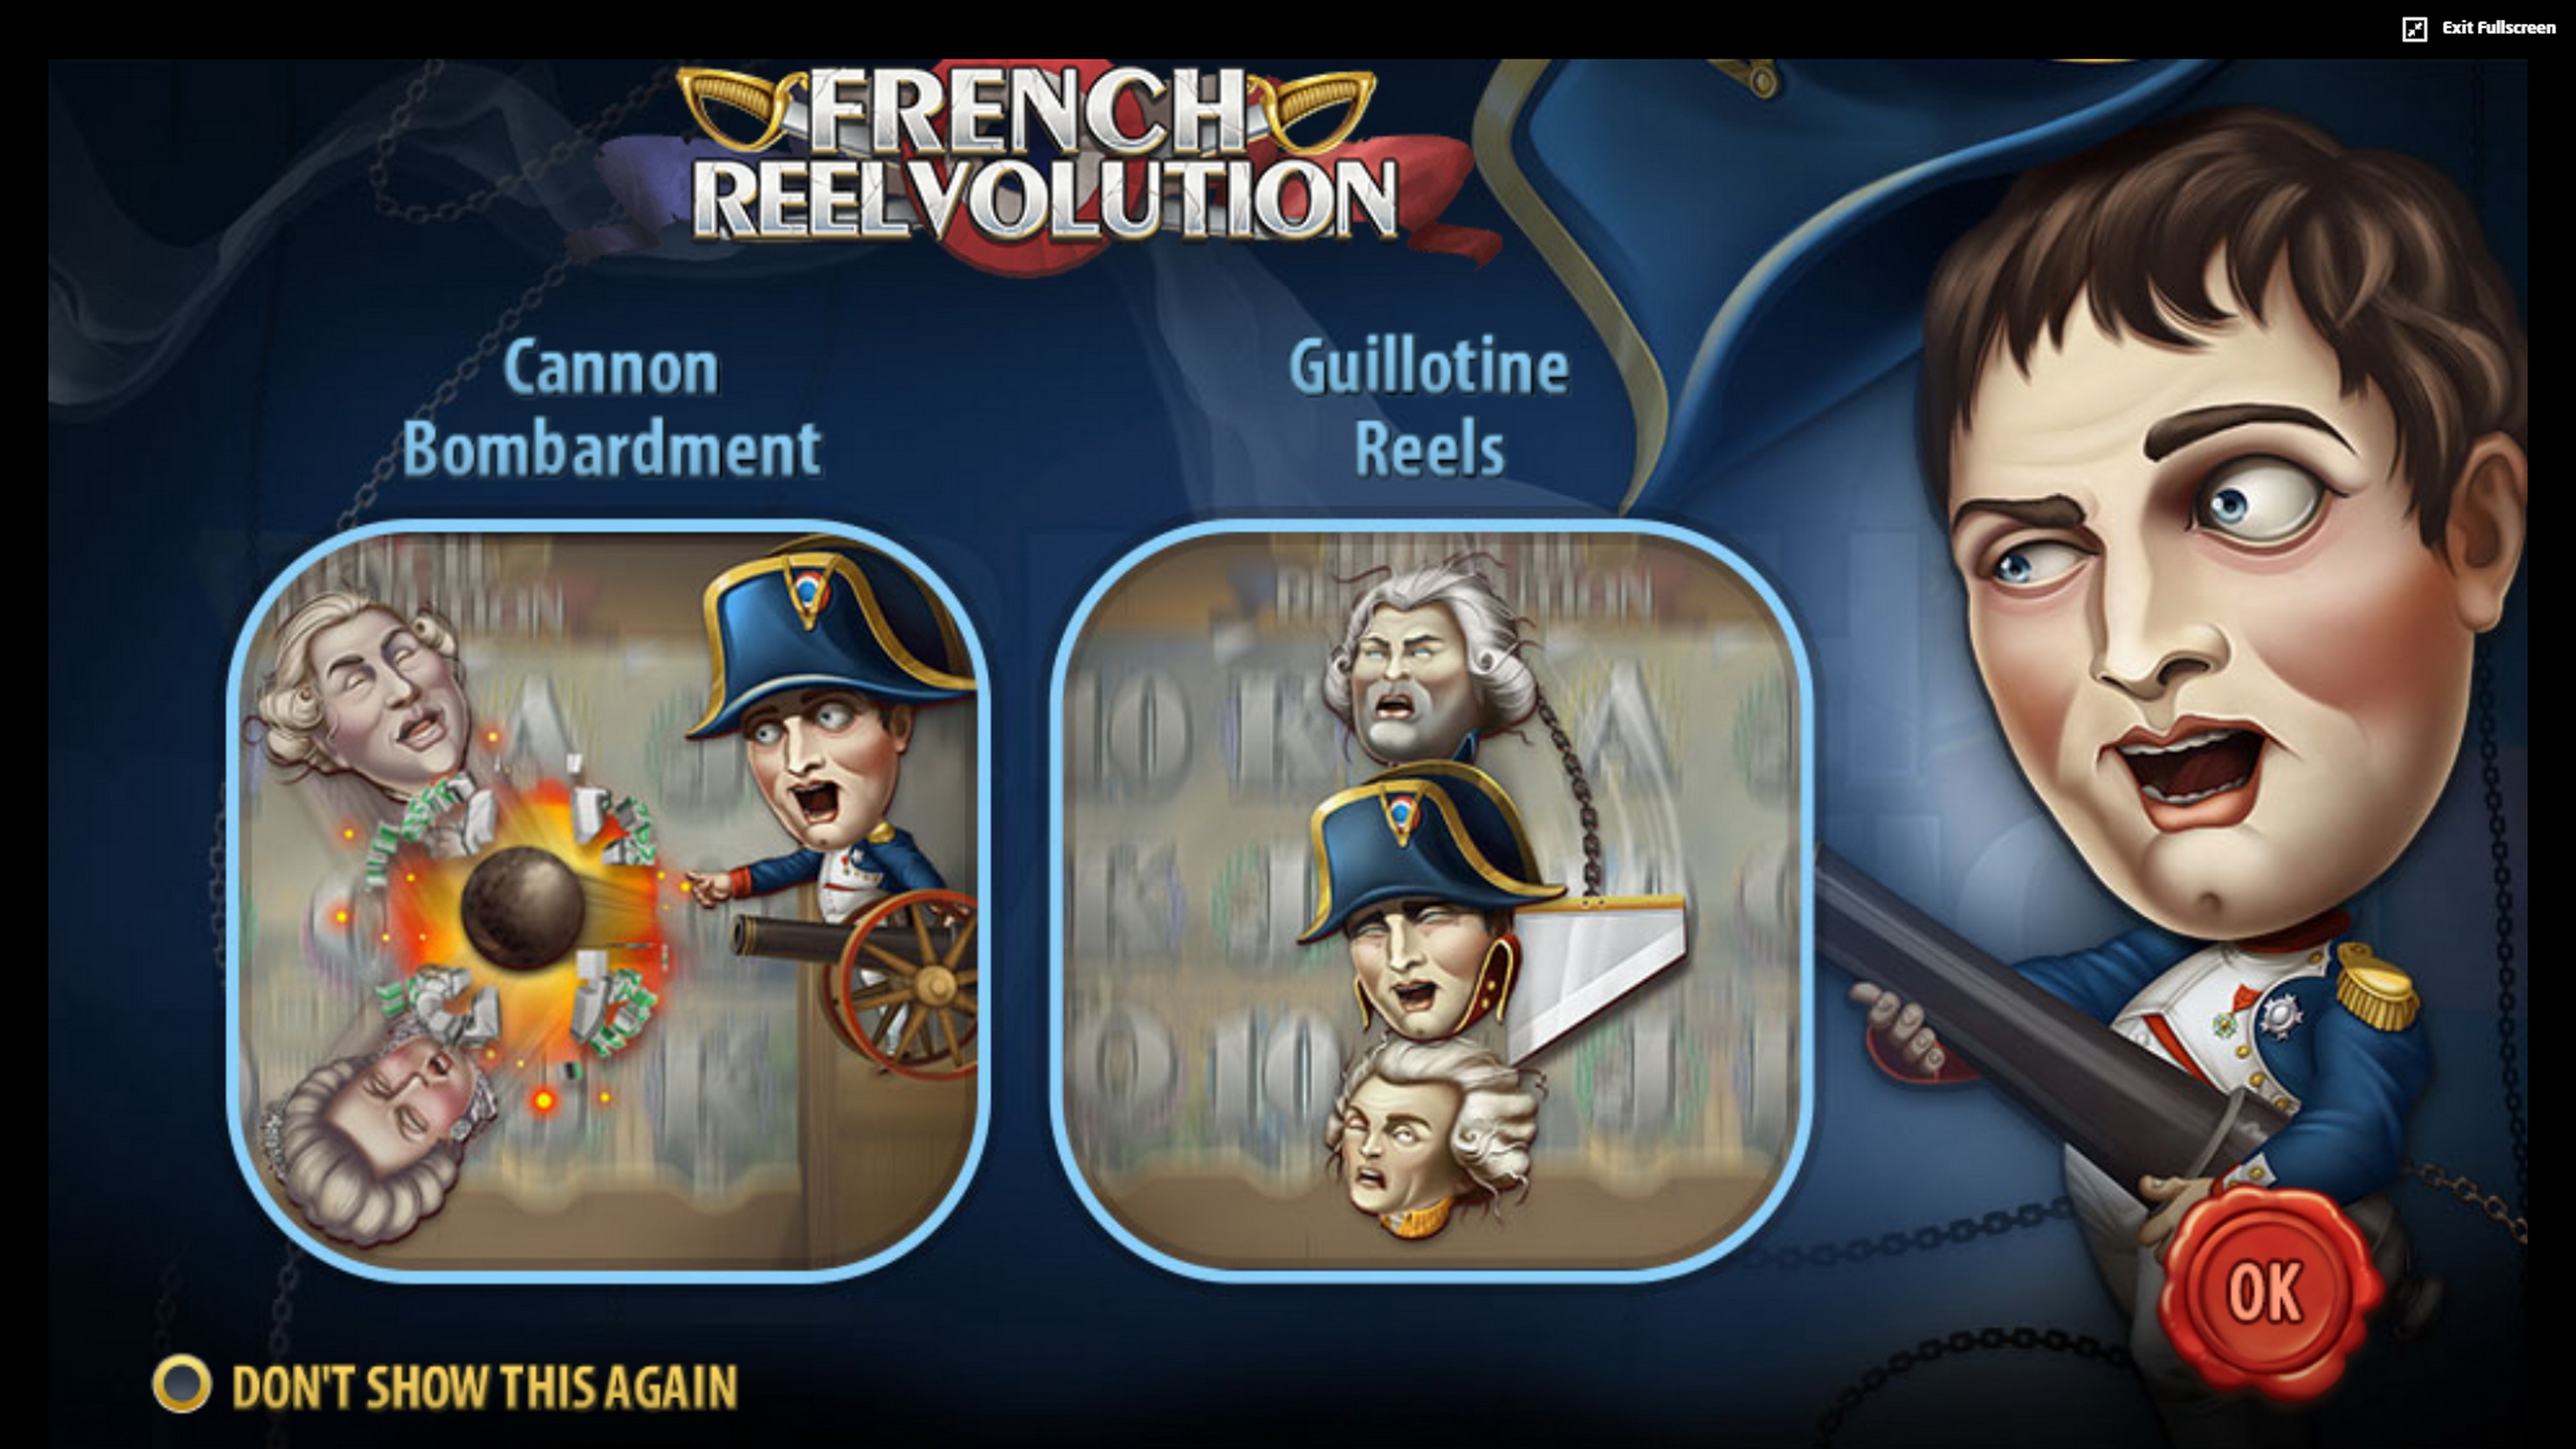 The French Reelvolution demo